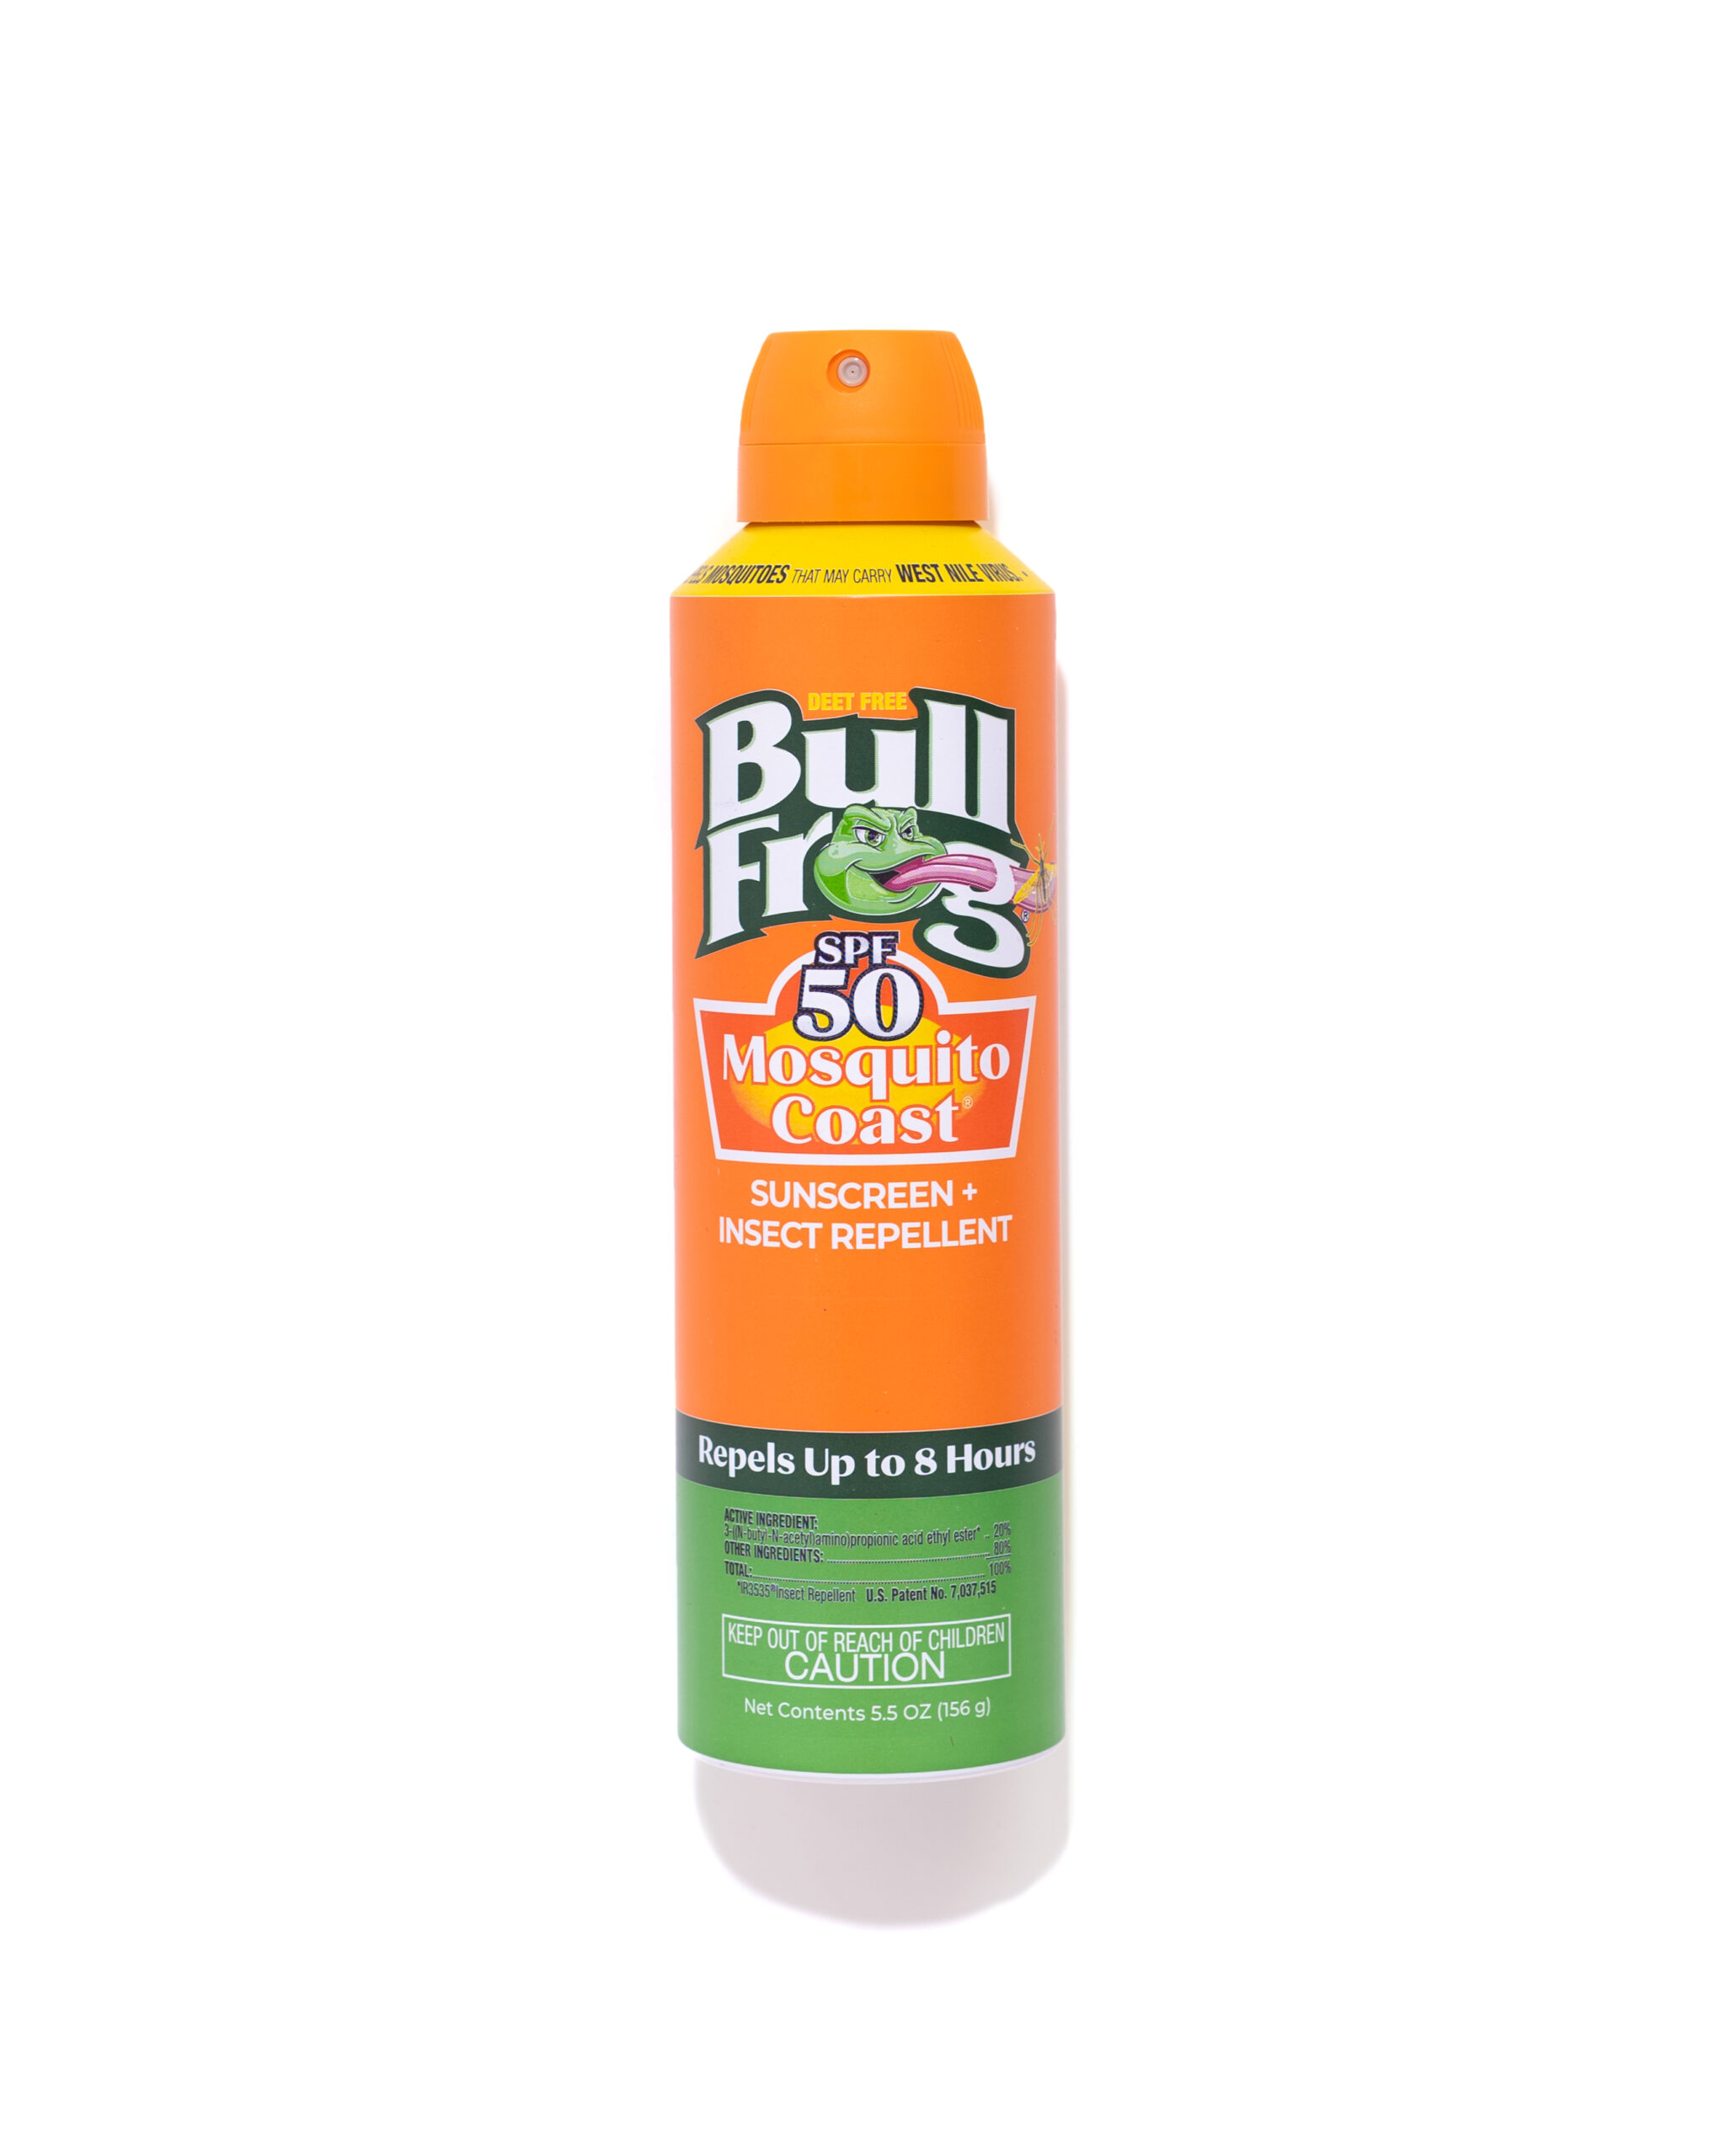 BULLFROG SUNSCREEN & INSECT REPELLENT - Outdoor Skin Protection